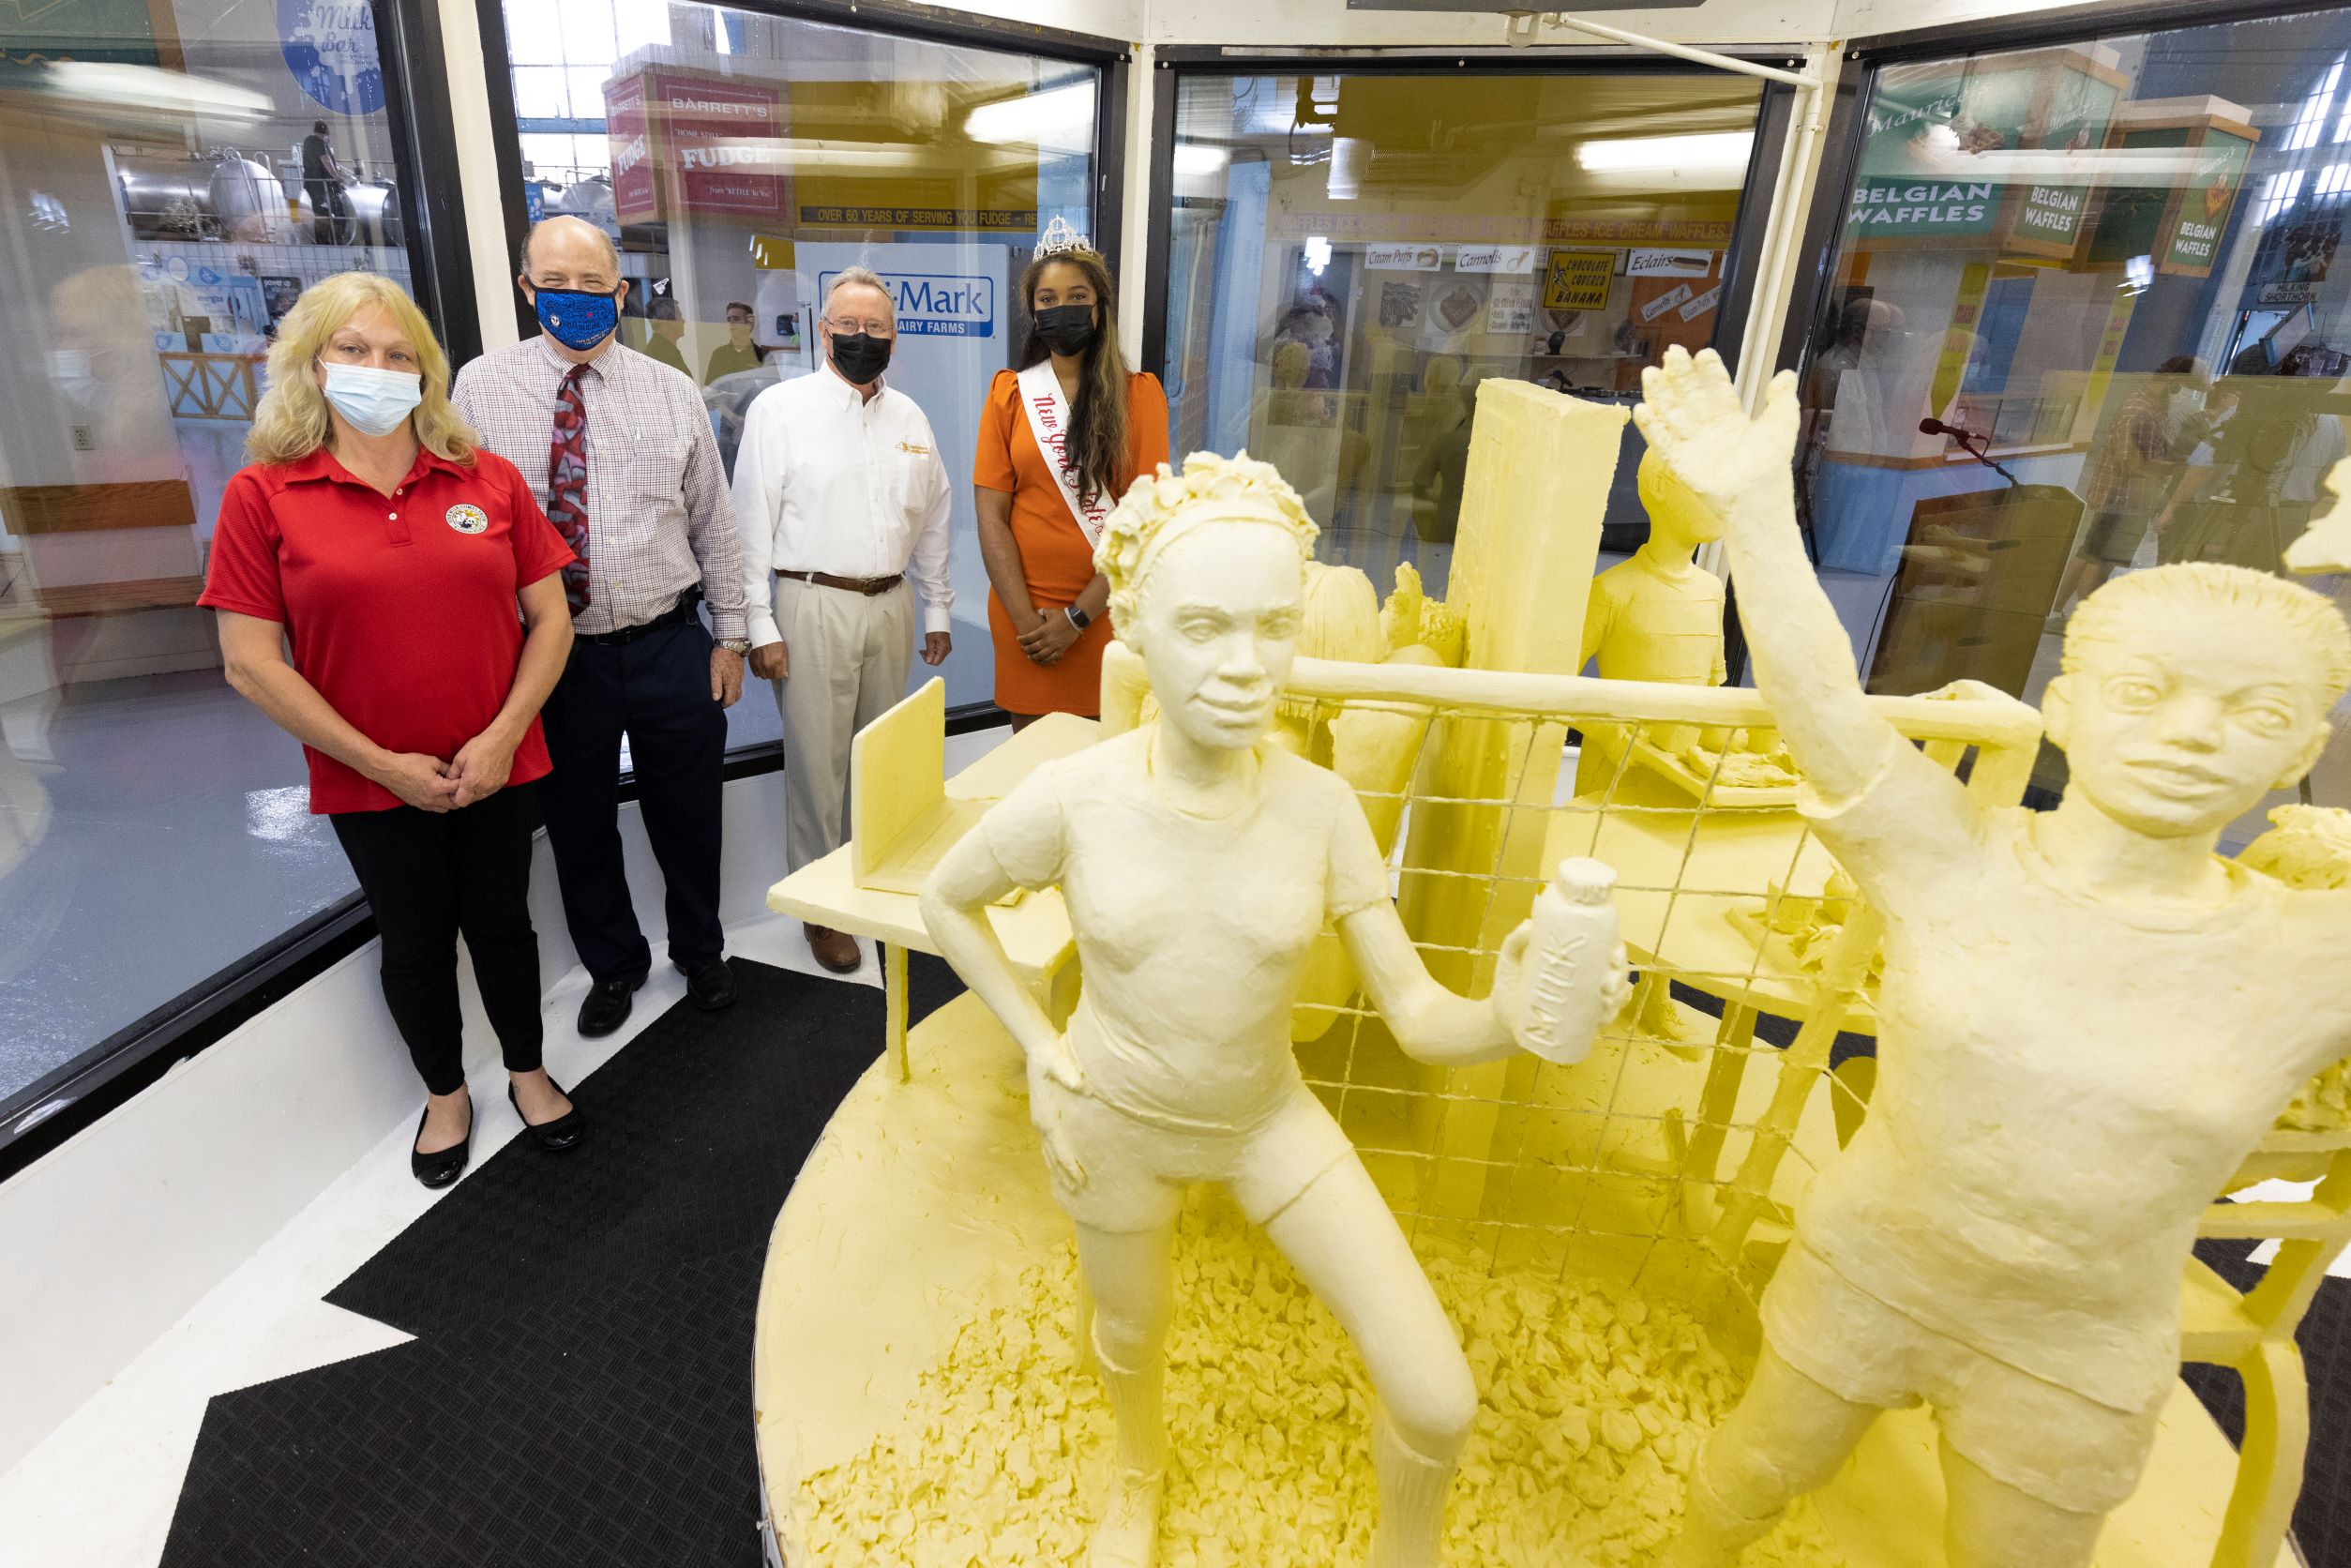 53rd Annual American Dairy Association North East  Butter Sculpture Unveiled: Back to School, Sports, and Play … You’re Gonna Need Milk For That.